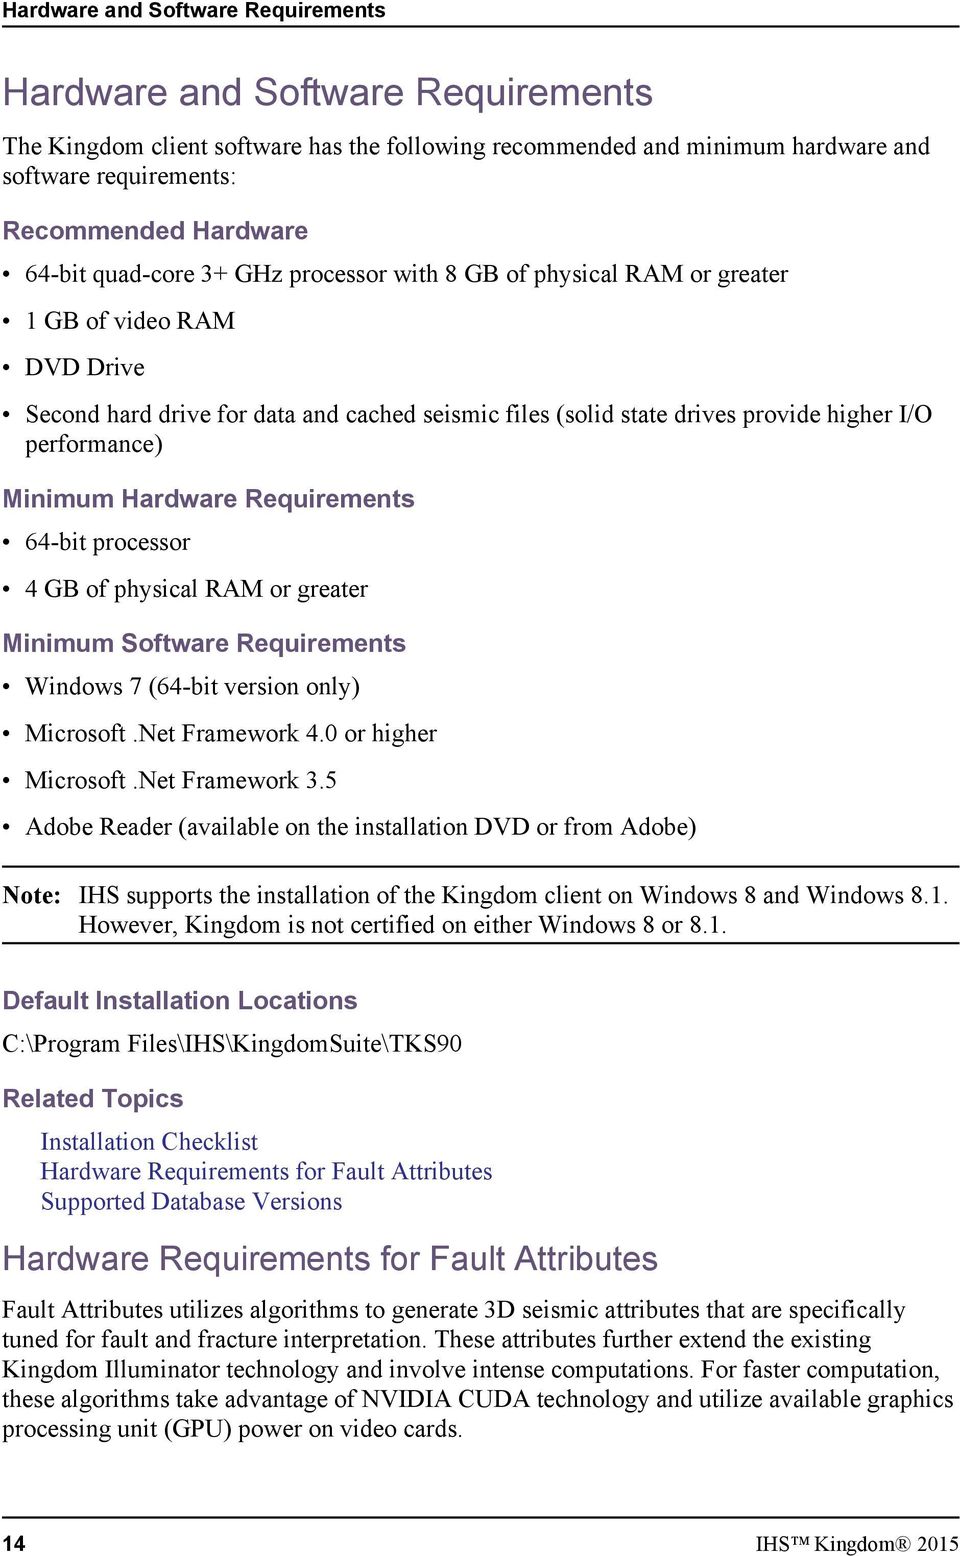 performance) Minimum Hardware Requirements 64-bit processor 4 GB of physical RAM or greater Minimum Software Requirements Windows 7 (64-bit version only) Microsoft.Net Framework 4.